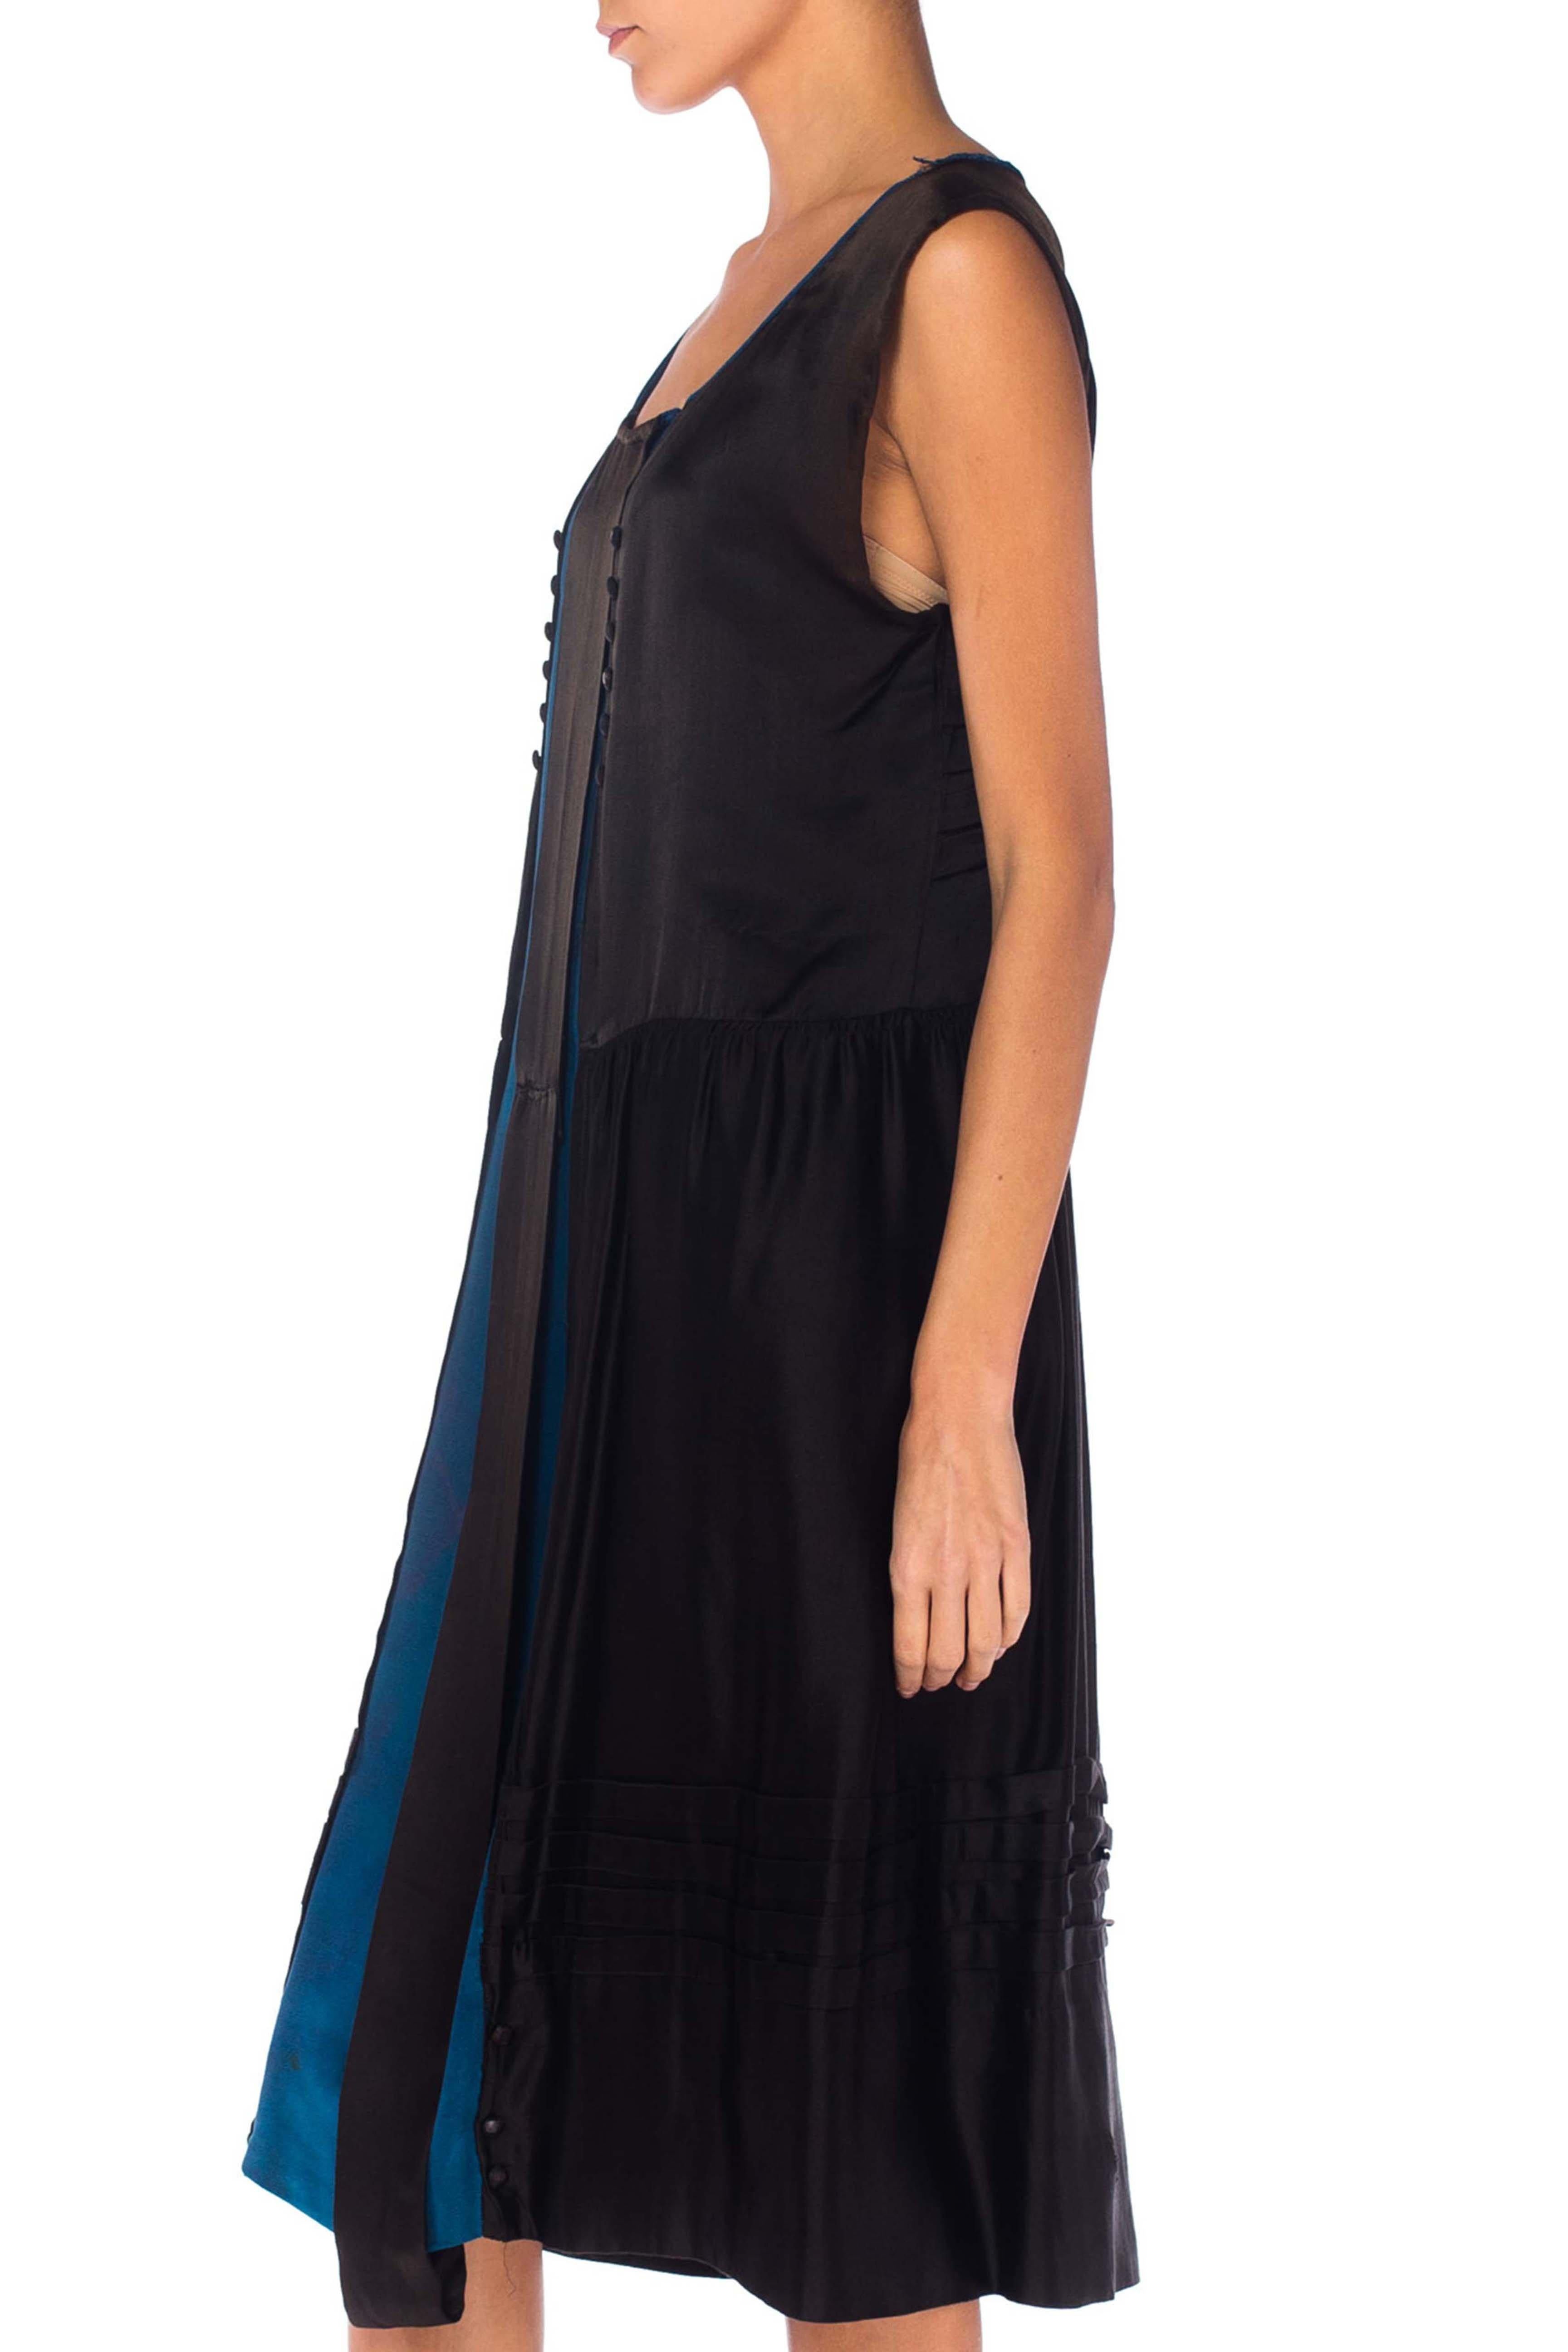 Areas of wear and subtle discoloration. Overall strong and wearable condition. Priced as-is 1920S Black Silk Satin Straight Cut Modern Flapper Dress With Bright Blue Inset Panel 